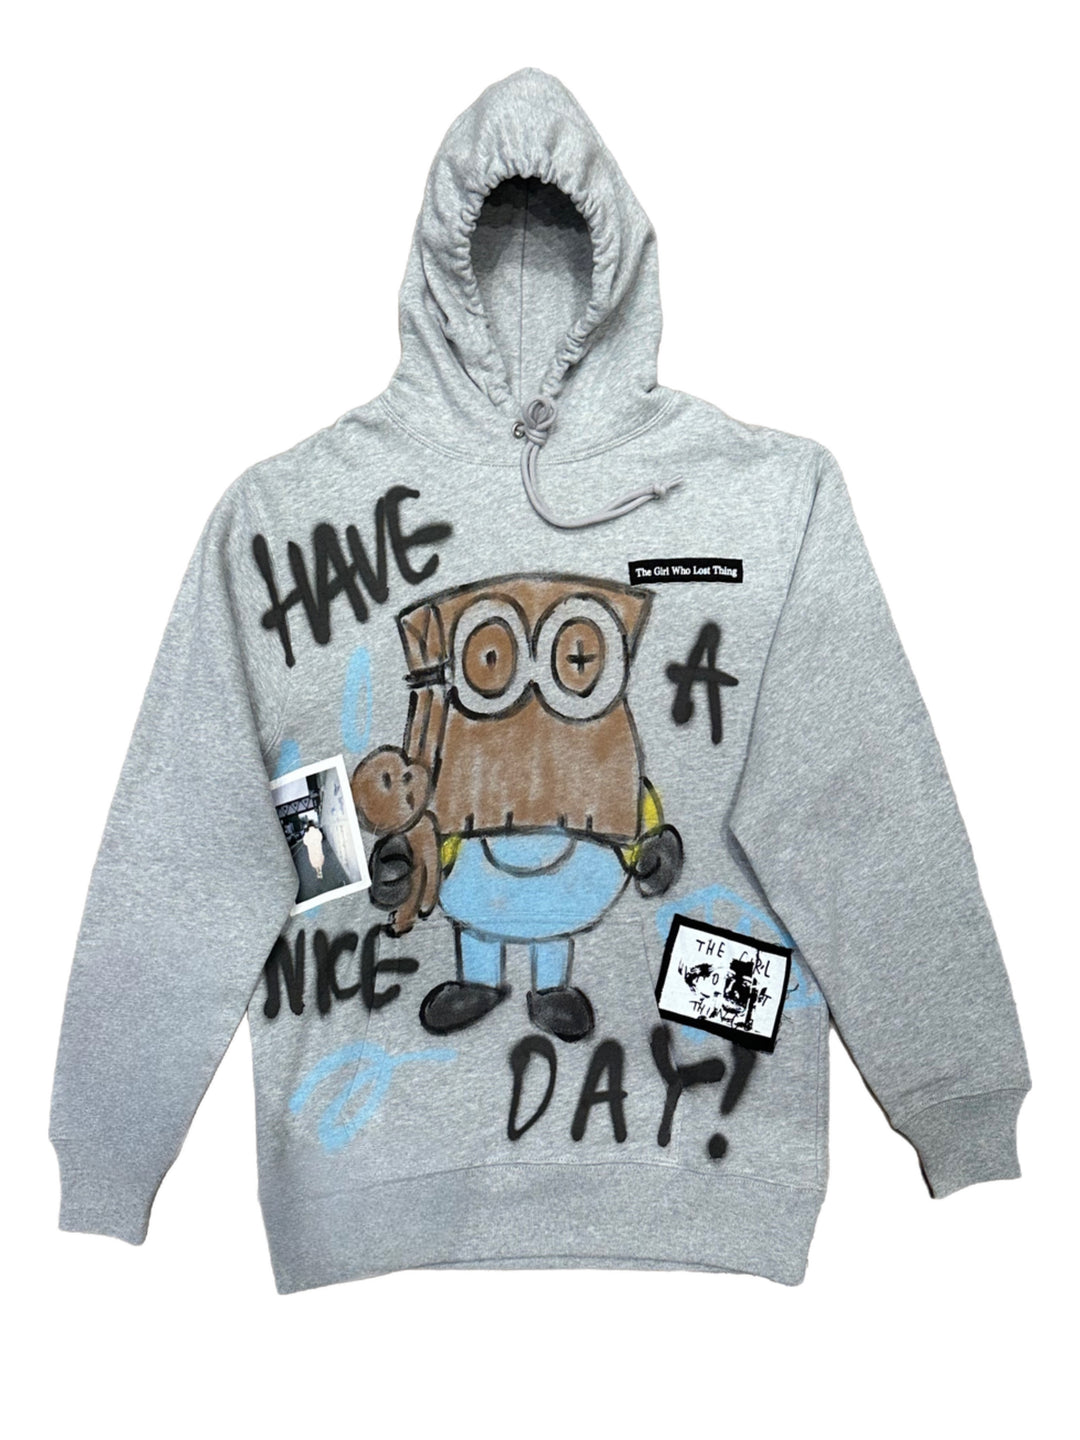 3NYCONCEPT.COM - HAVE A NICE DAY GUERNIKA HOODIE